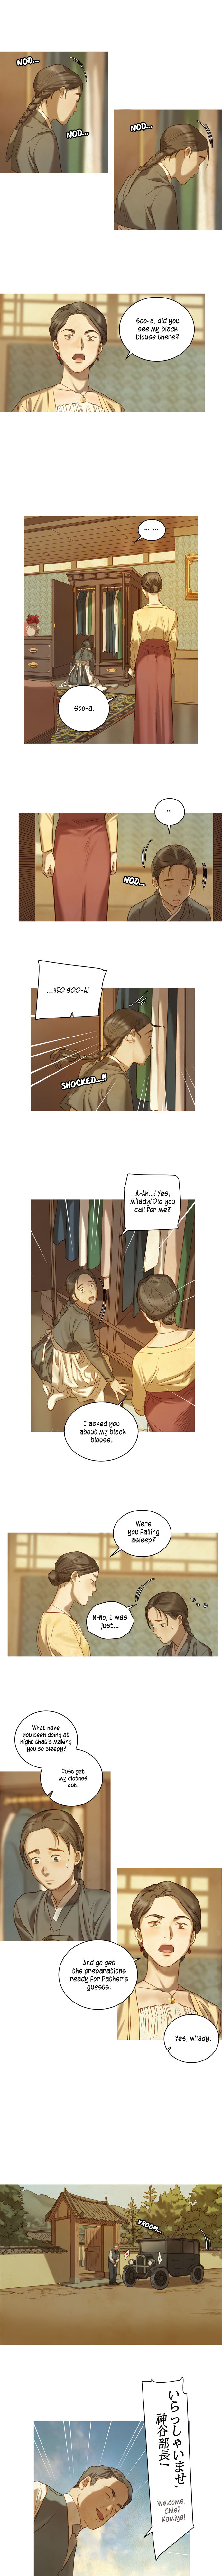 Gorae Byul - The Gyeongseong Mermaid - Chapter 3 Page 8